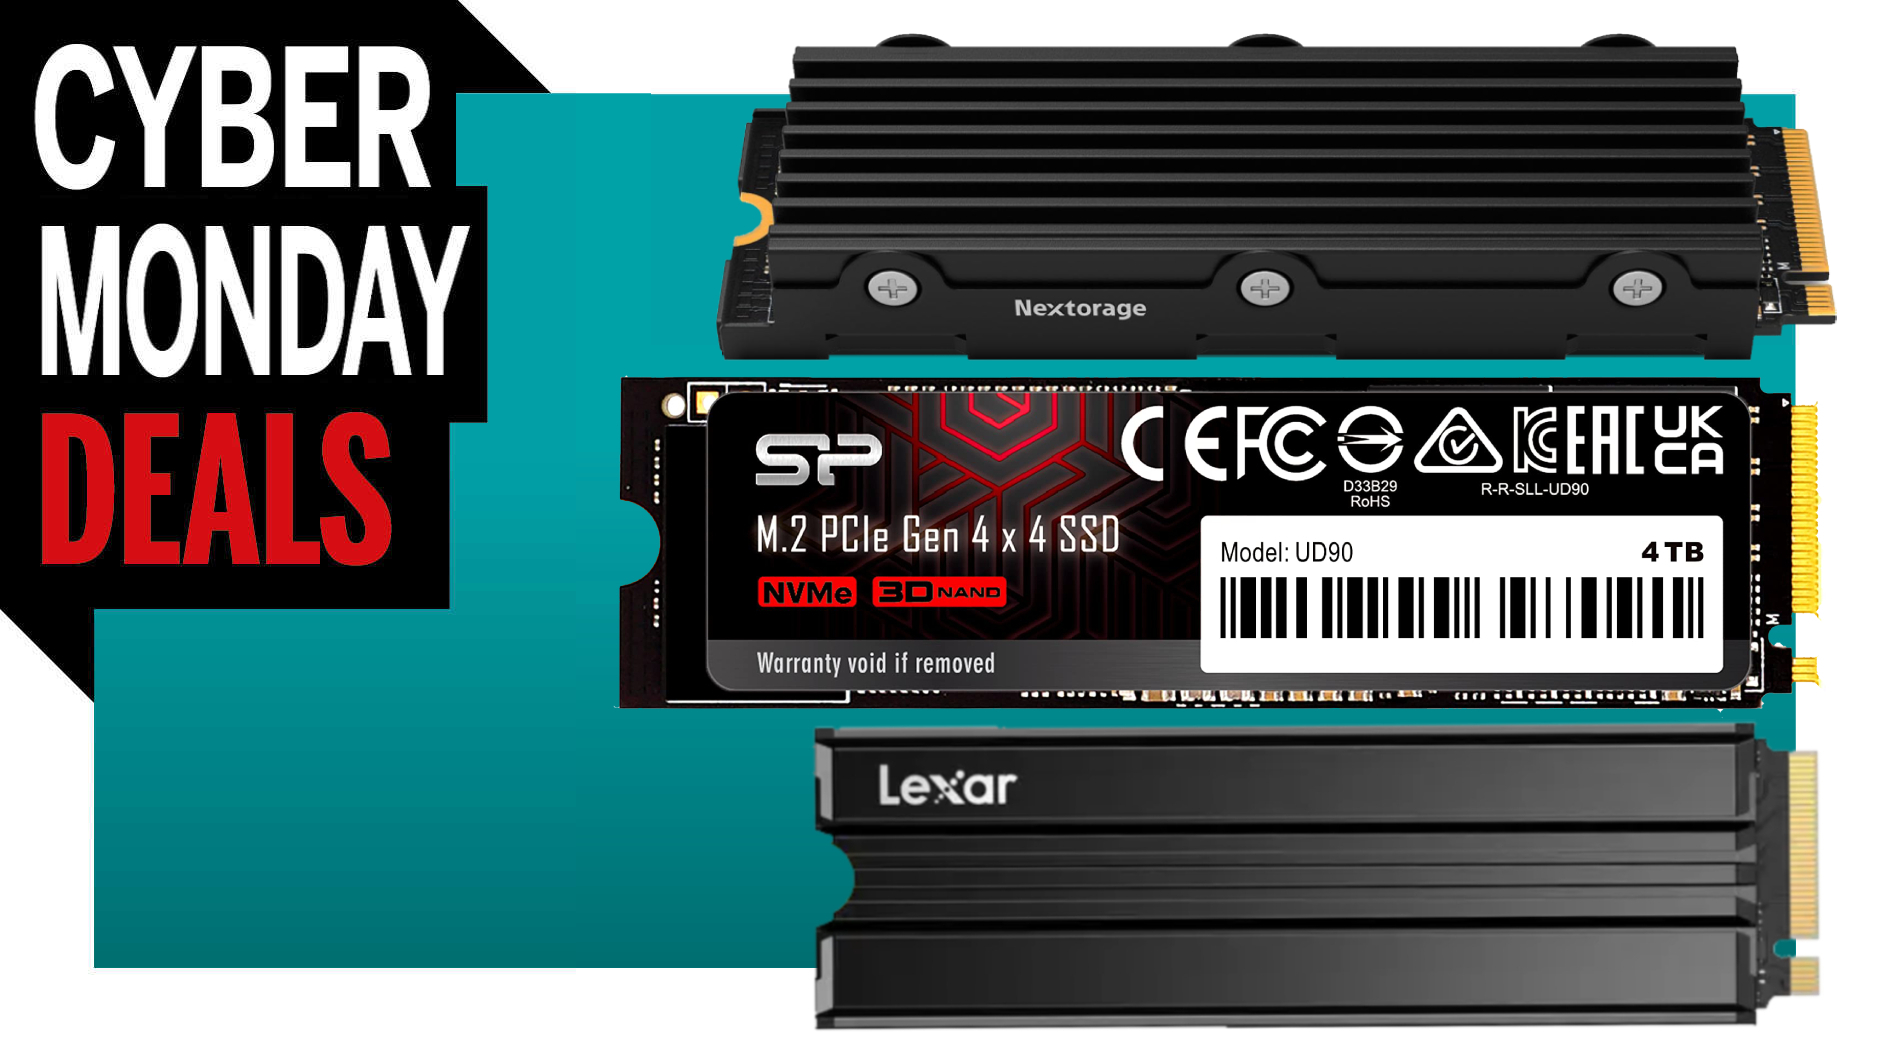 At just 4¢ per GB, why not just get 4TB of SSD storage and never worry ...